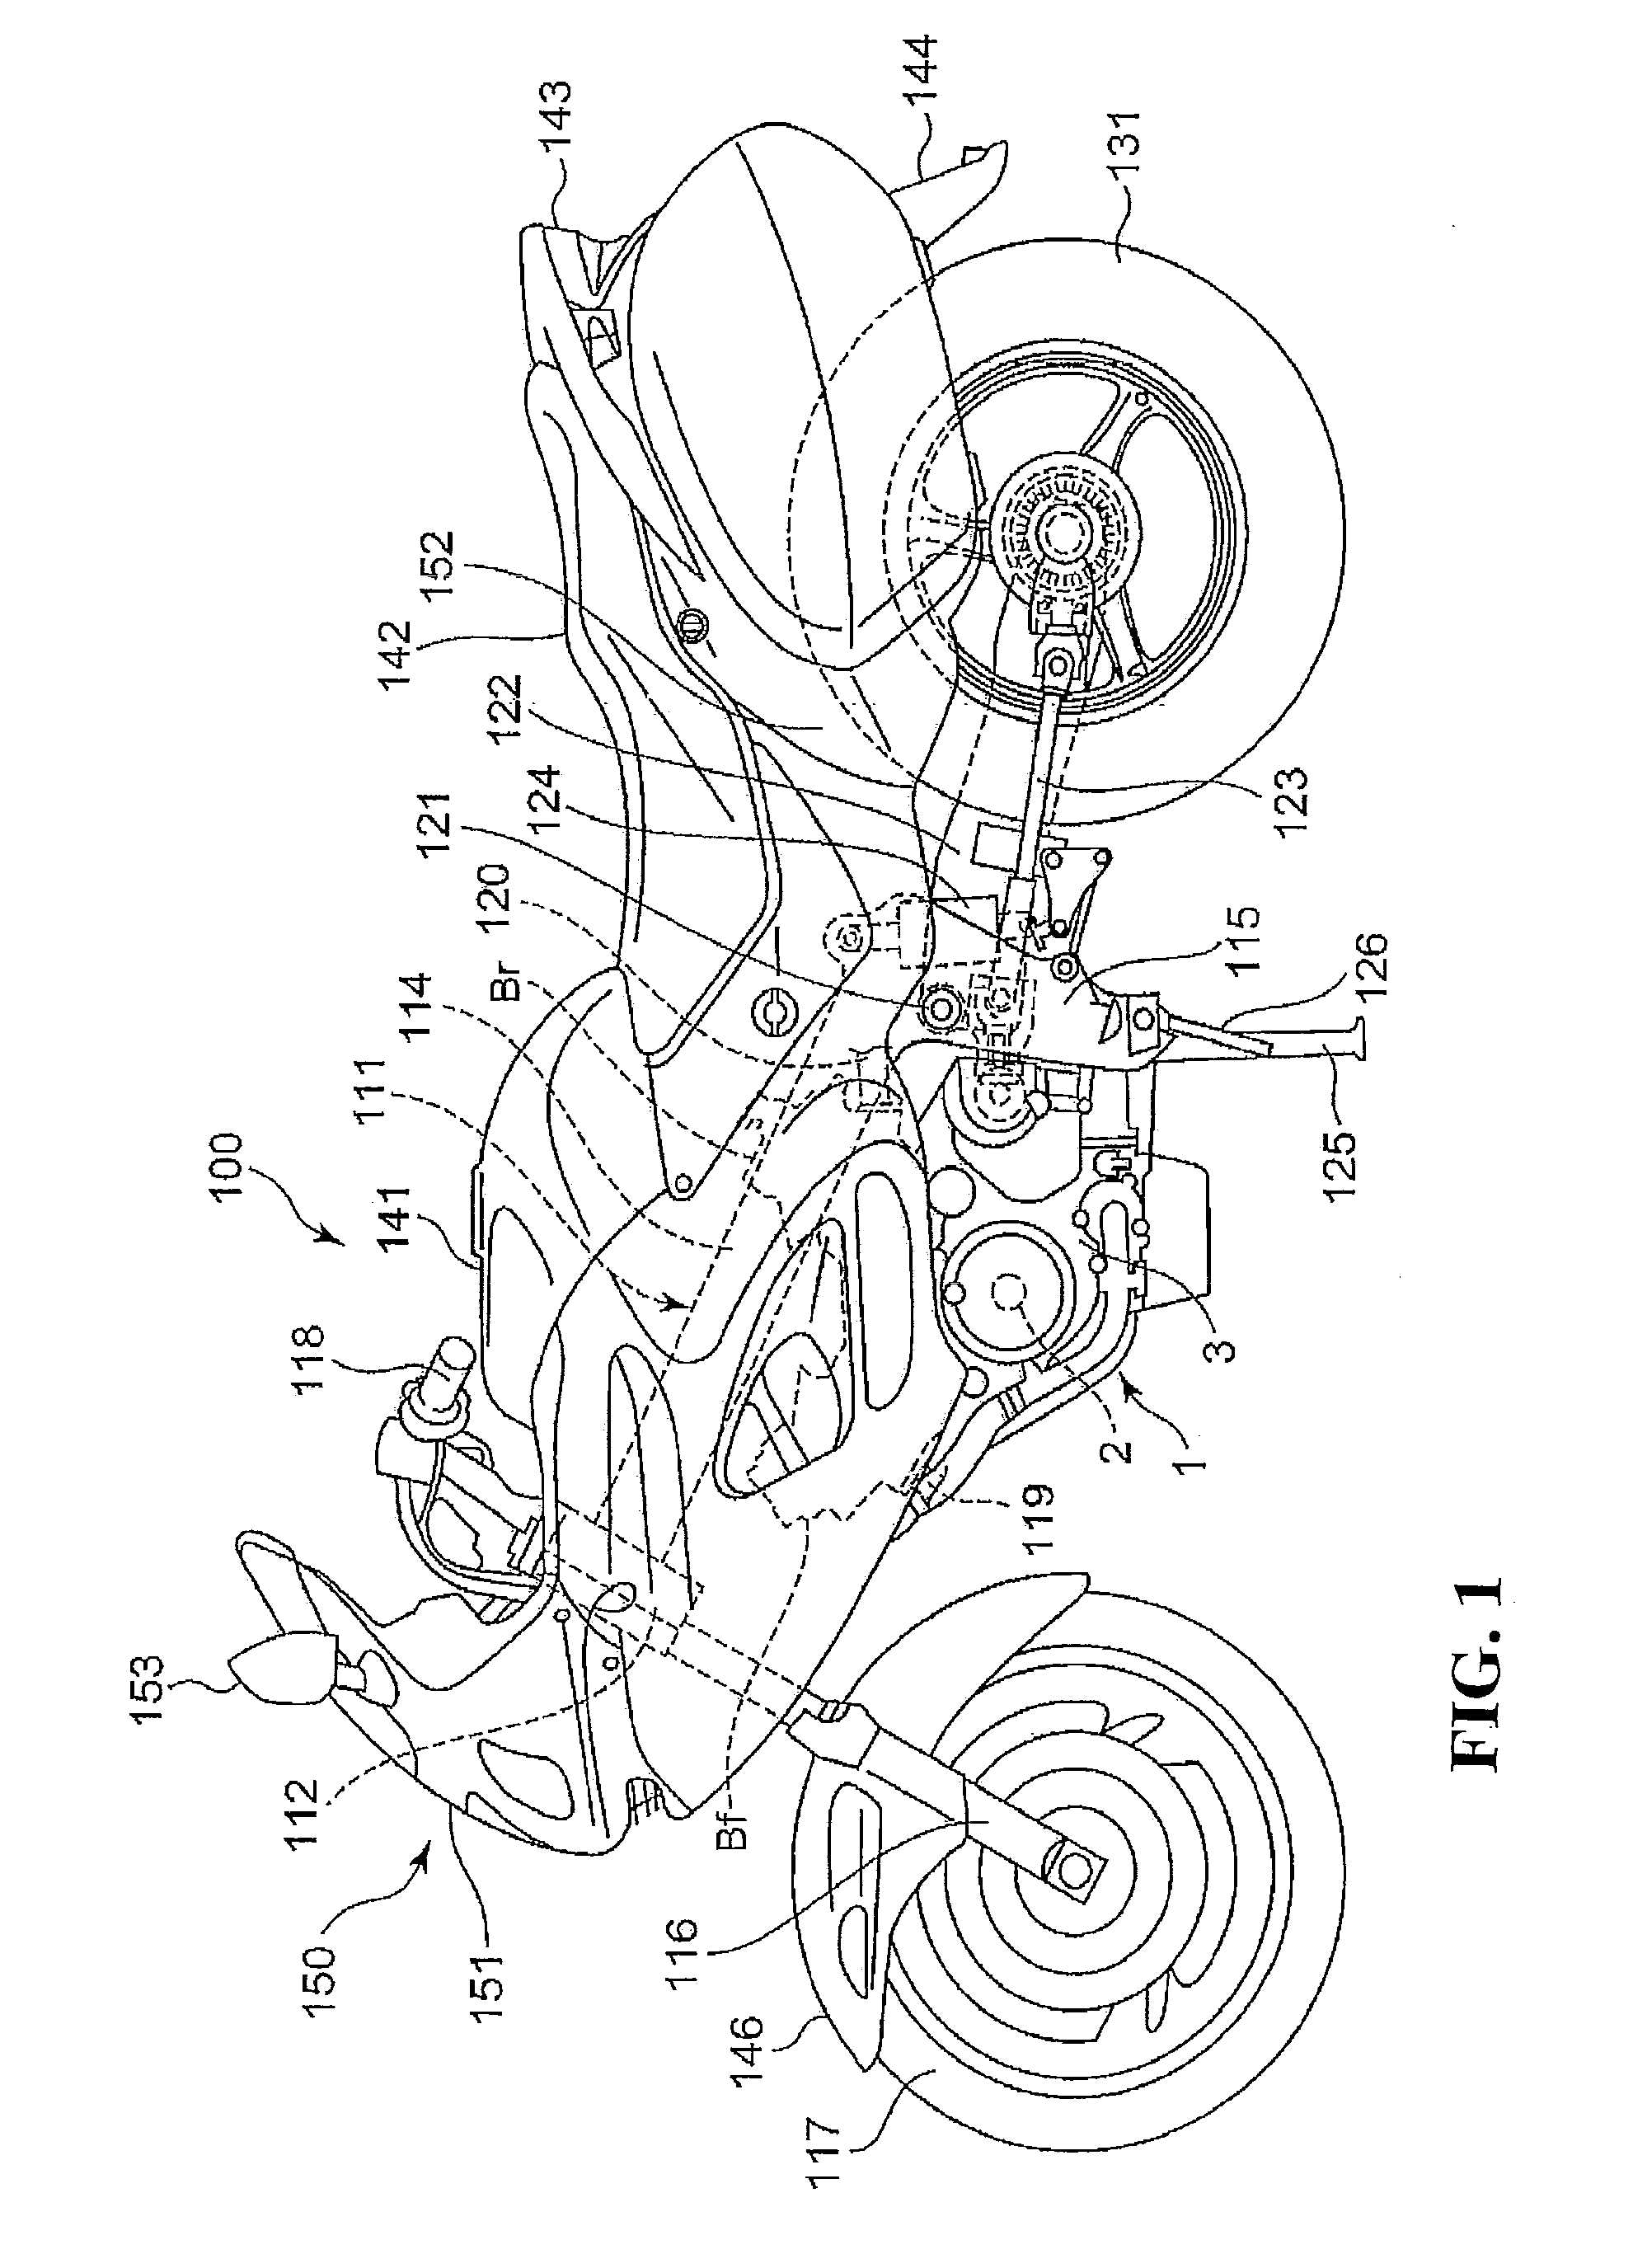 Ignition device attachment structure for internal combustion engine